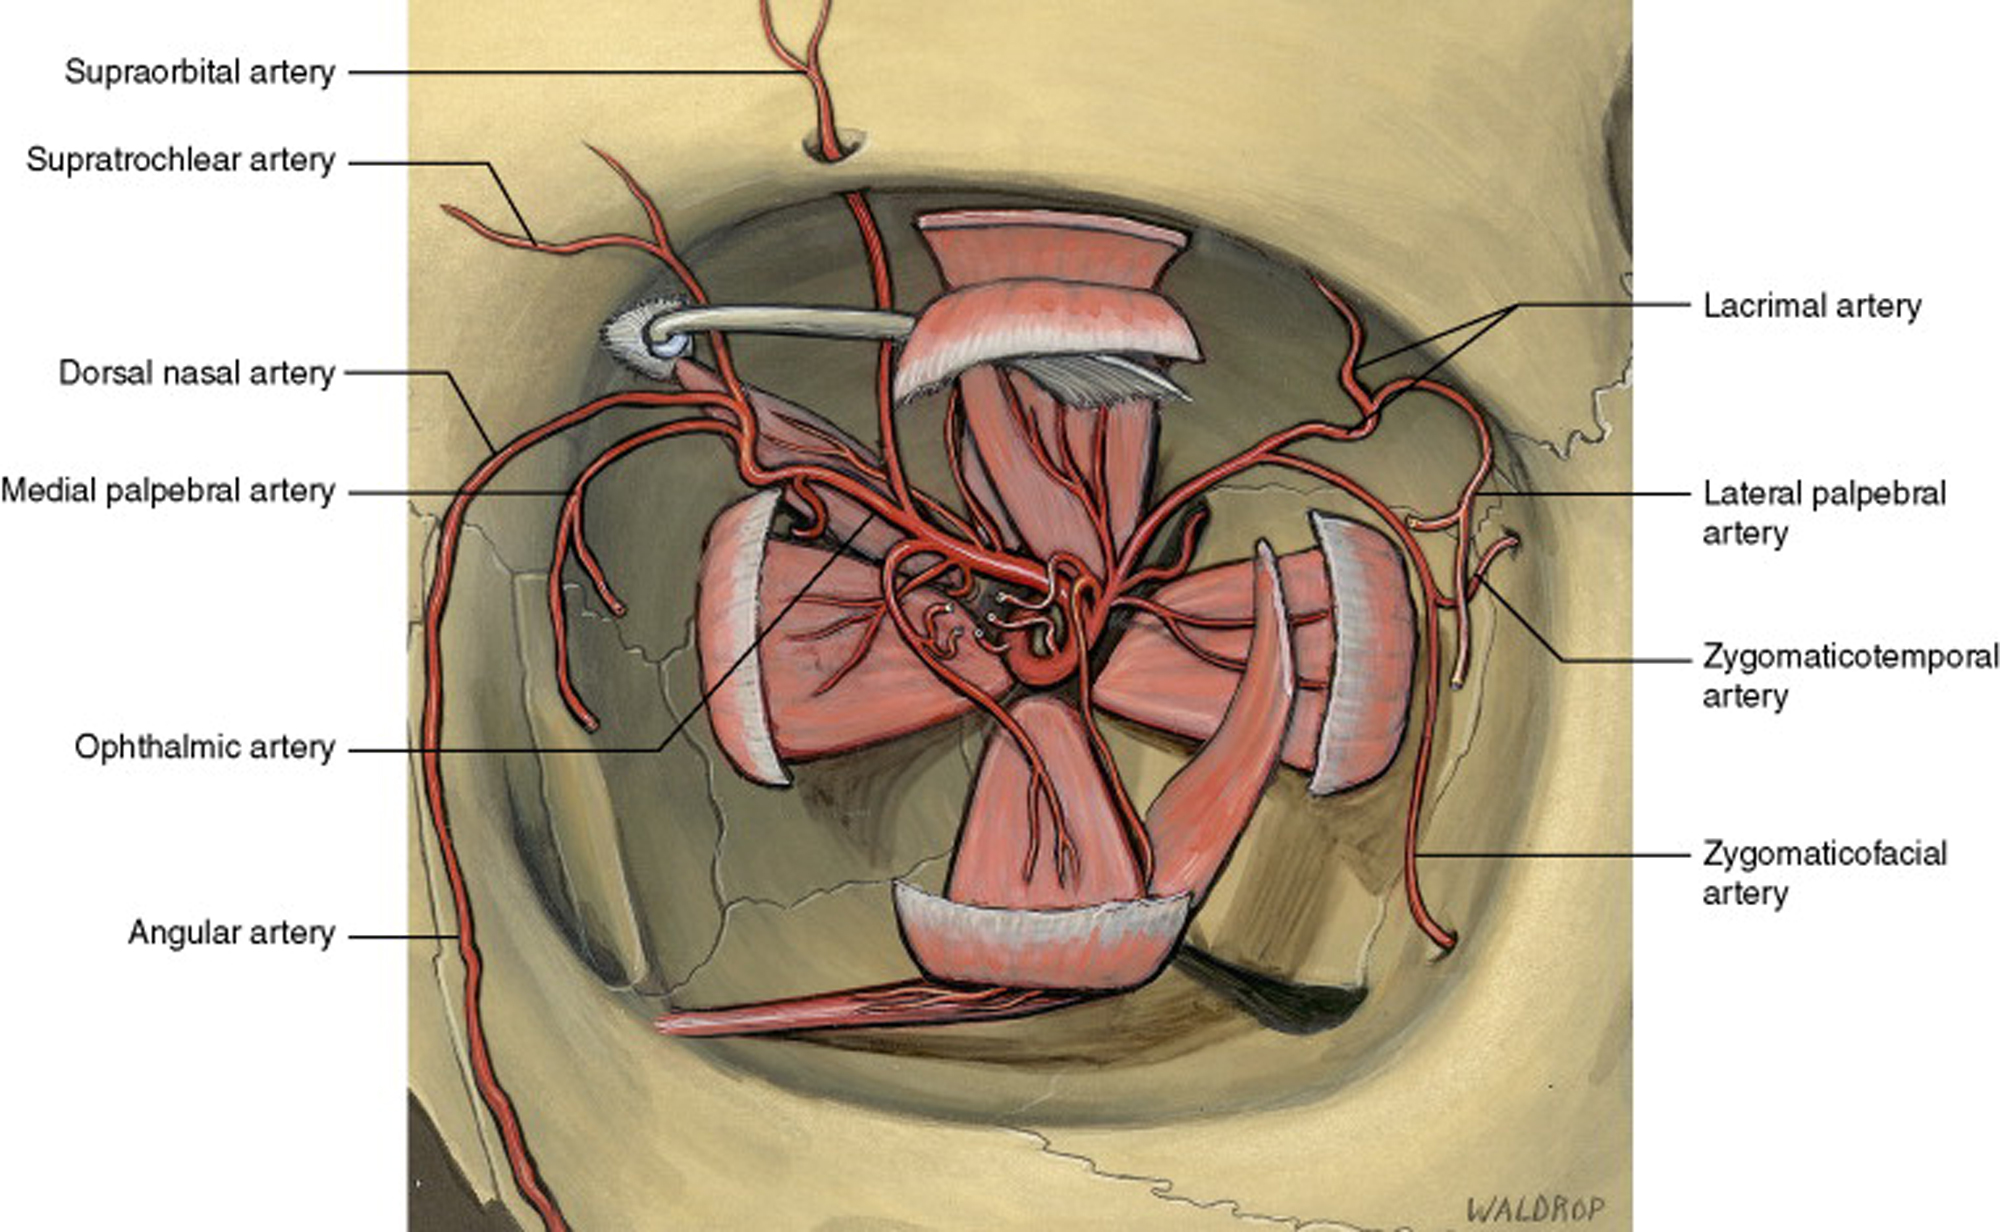 Orbital arteries with extraocular muscles 